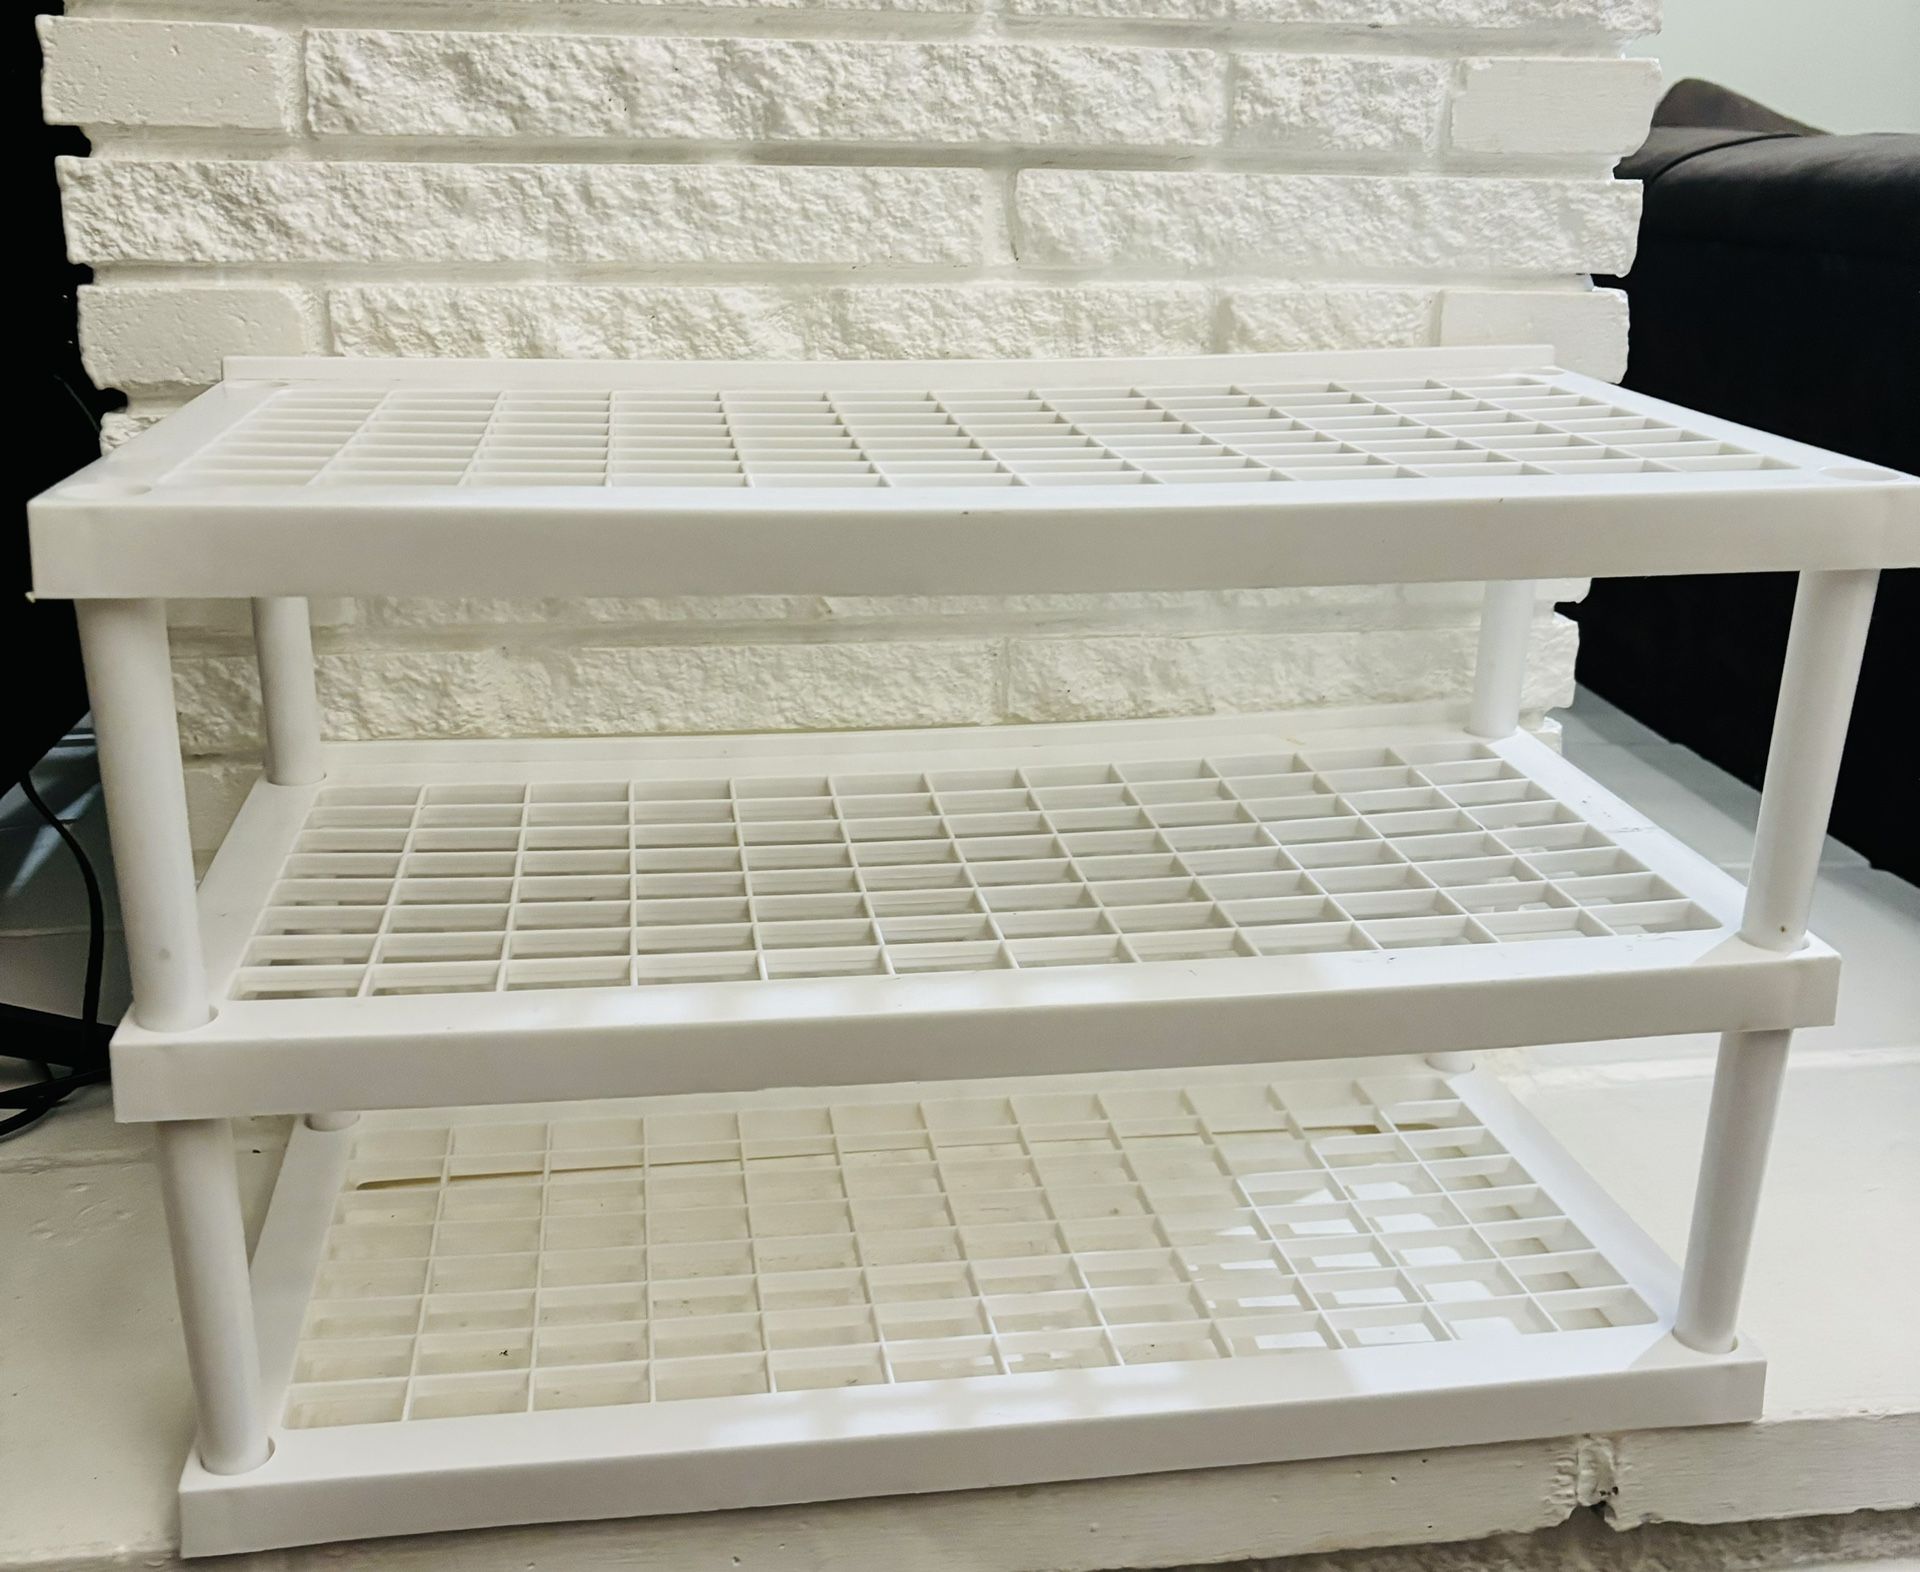 3 tier storage or shoe rack new In condition white color 24" x16"